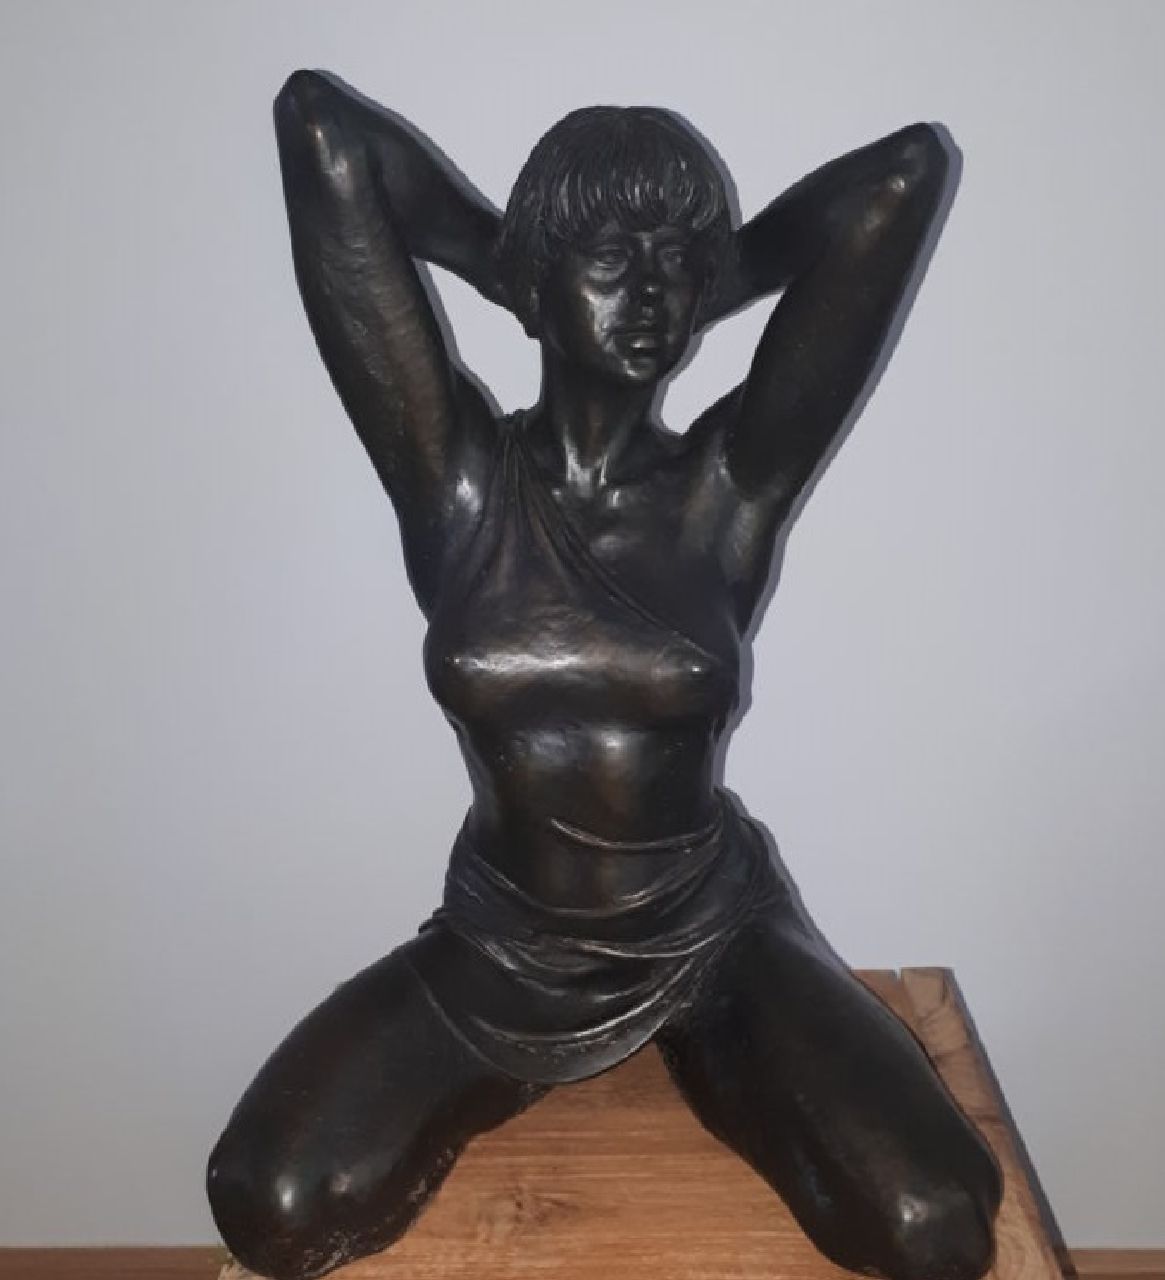 Duriez I.  | Irénée Duriez | Sculptures and objects offered for sale | Pascale, bronze 56.0 x 34.0 cm, signed on the bottom